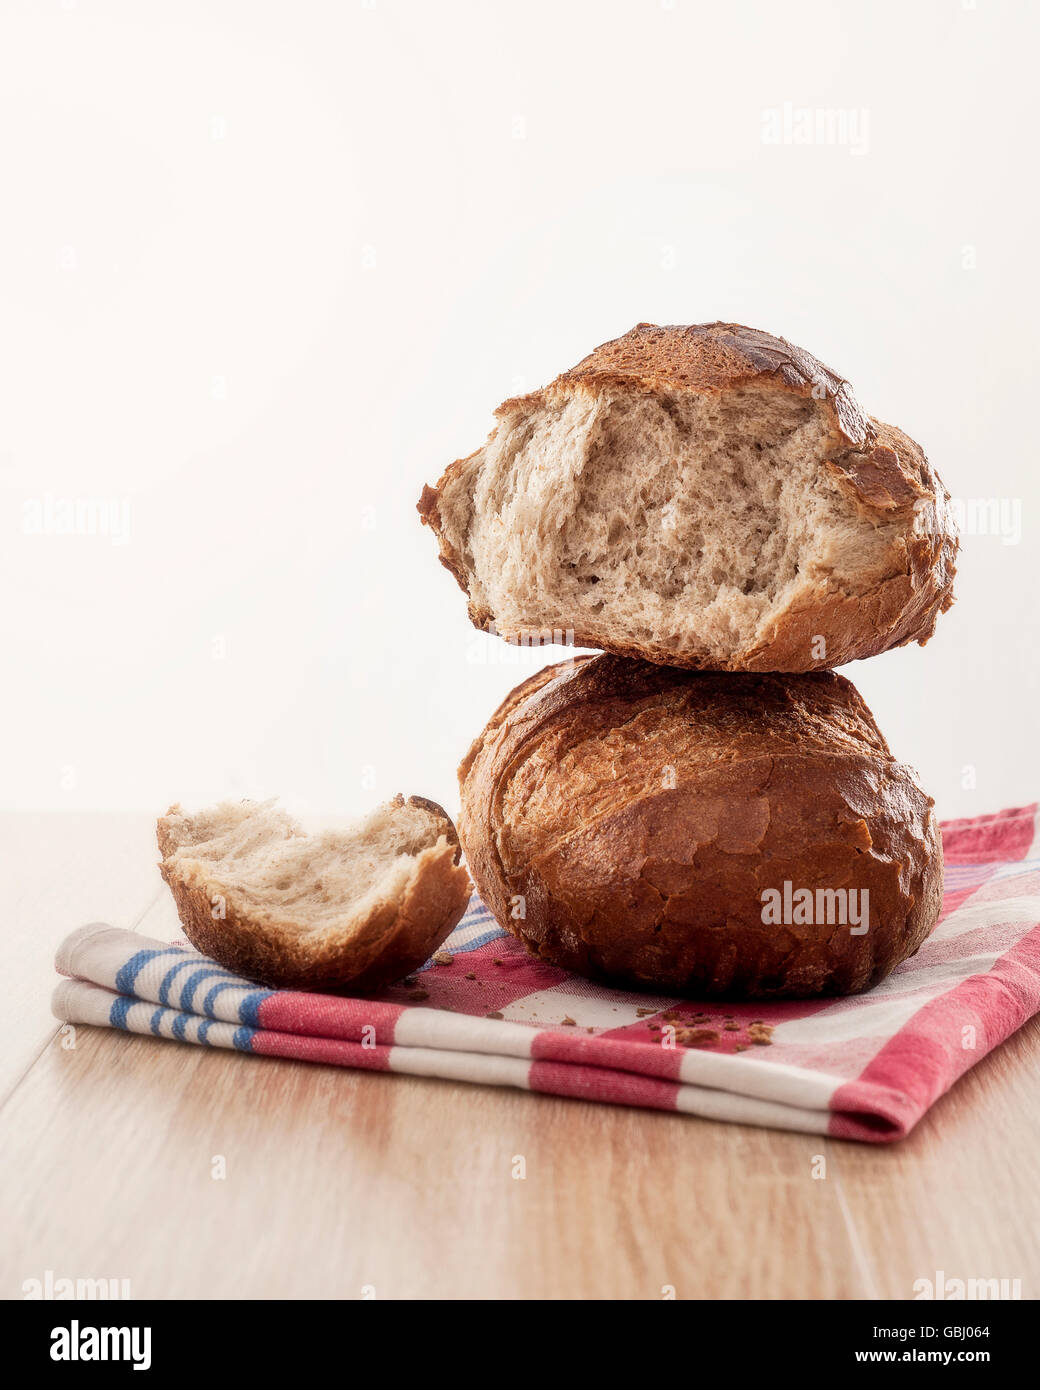 Rustic crusty bread on a red towl on a table Stock Photo